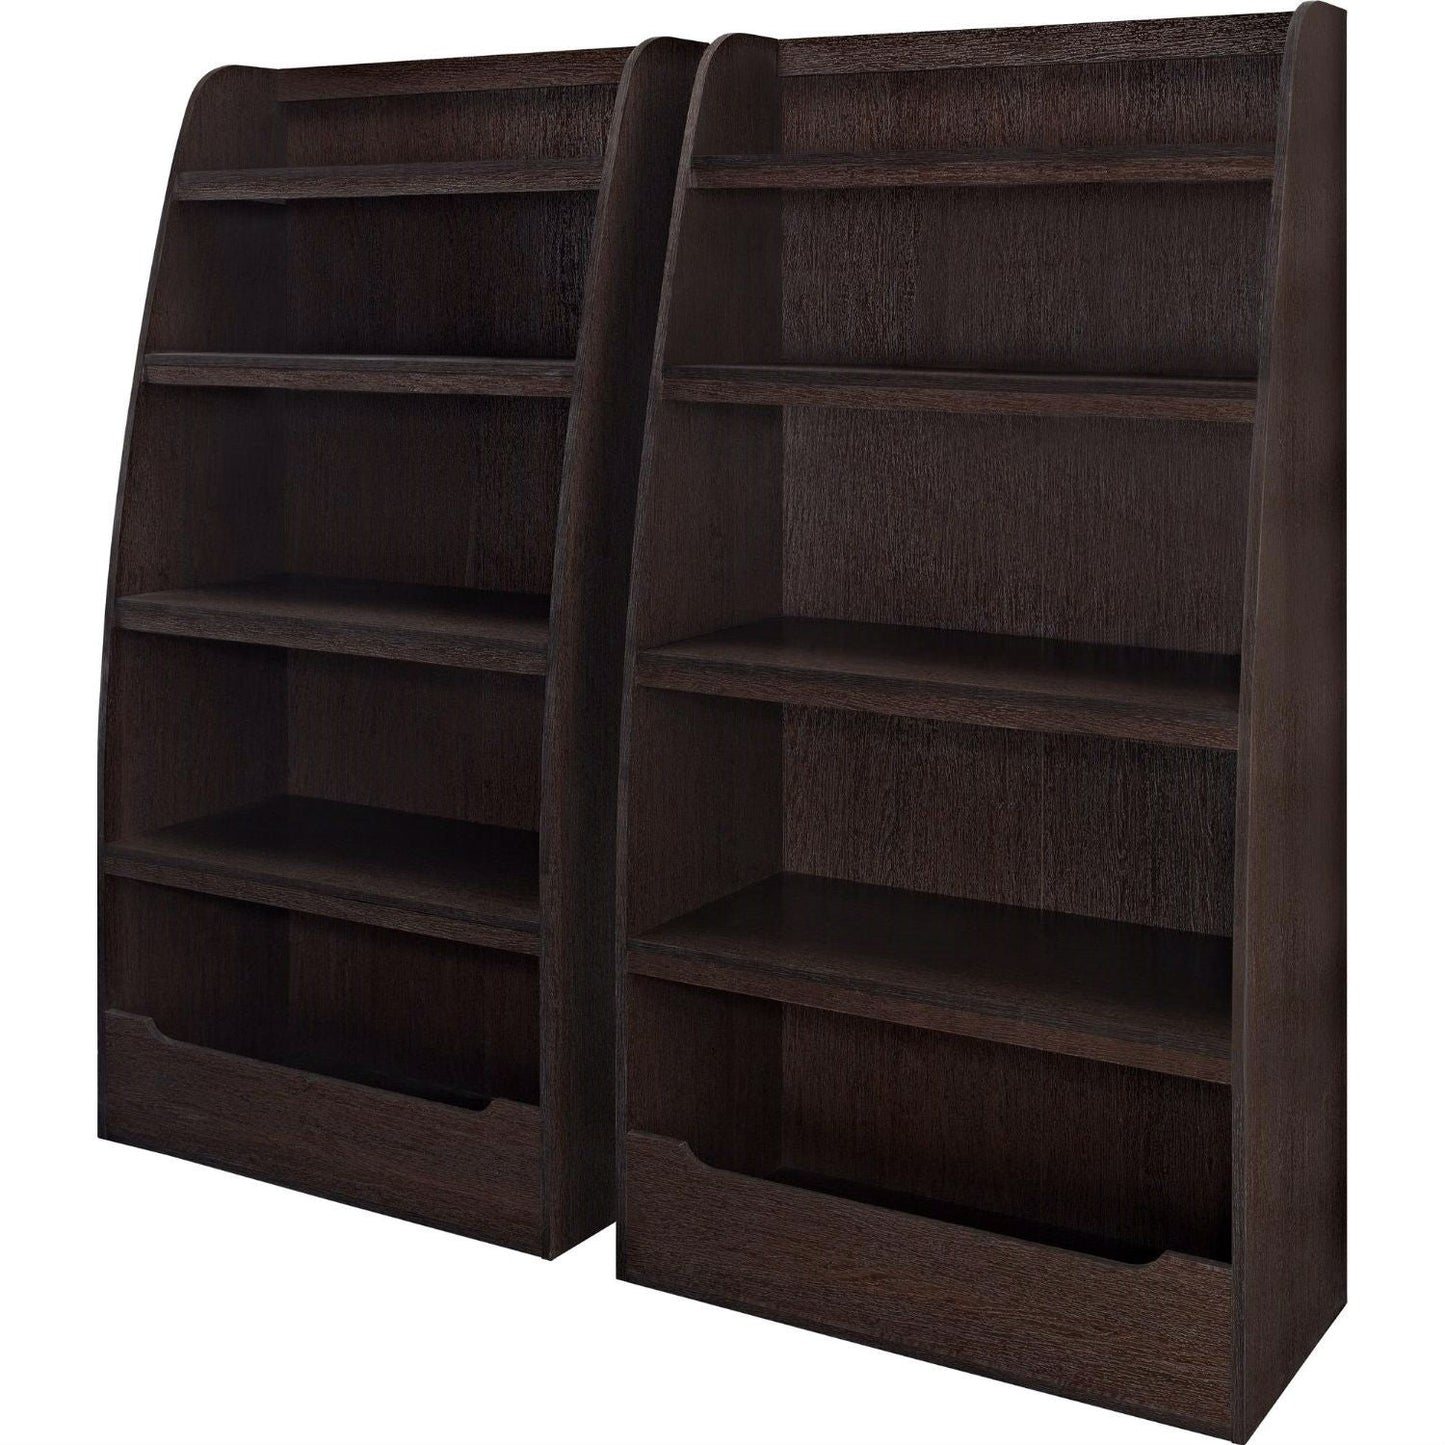 Living Room > Bookcases - Kids 4-Shelf Bookcase In Espresso Wood Finish Childs Bedroom